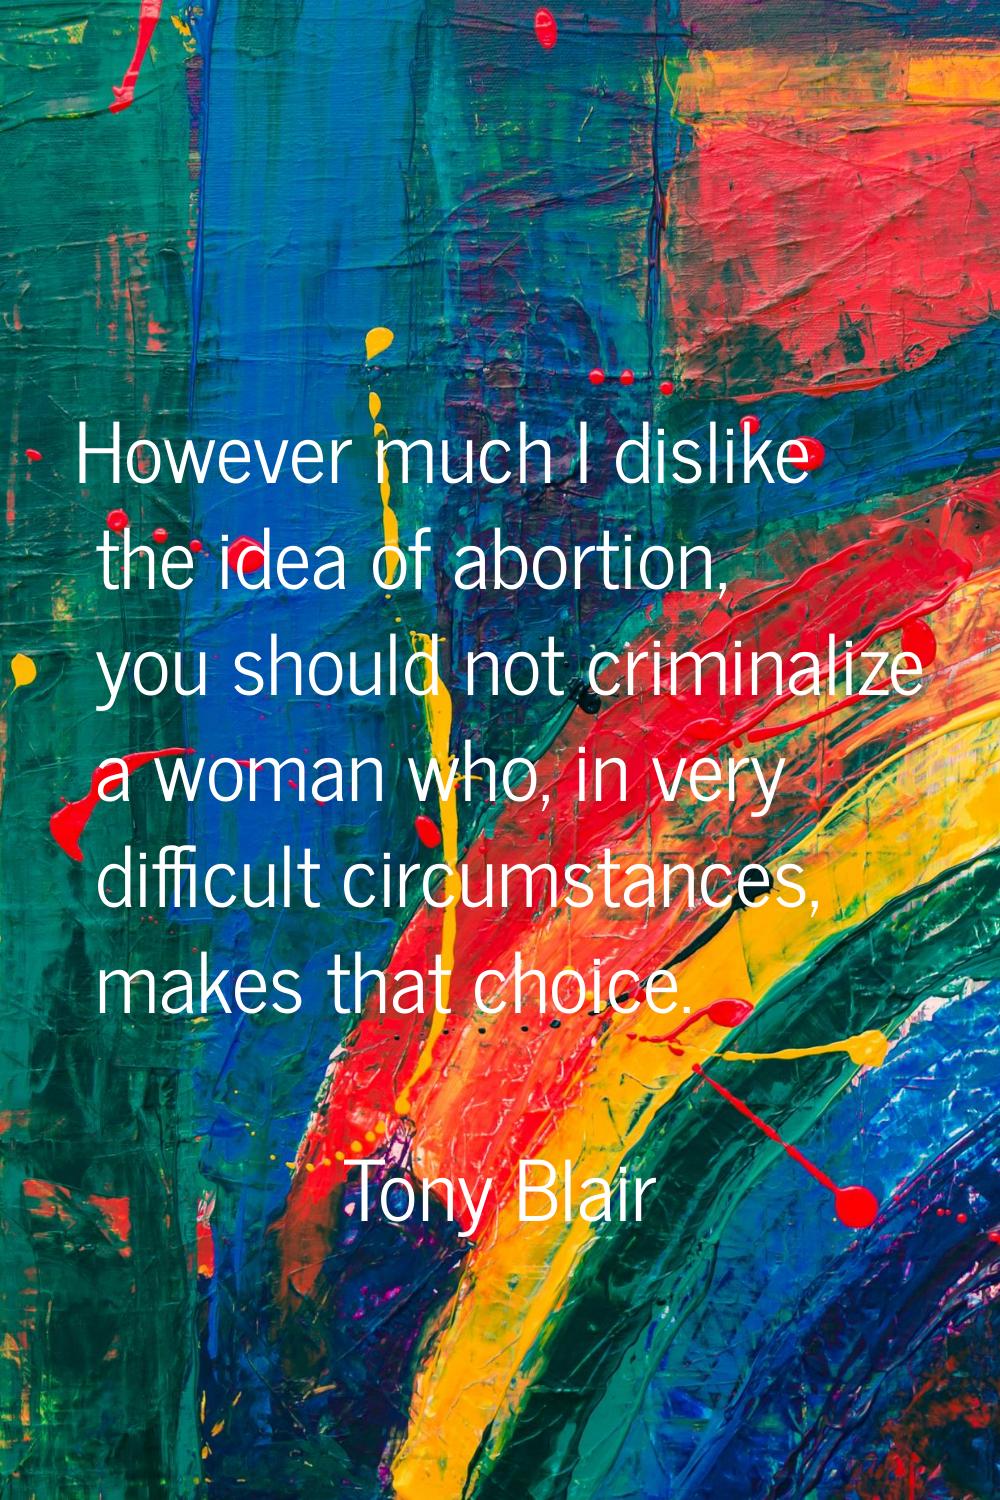 However much I dislike the idea of abortion, you should not criminalize a woman who, in very diffic